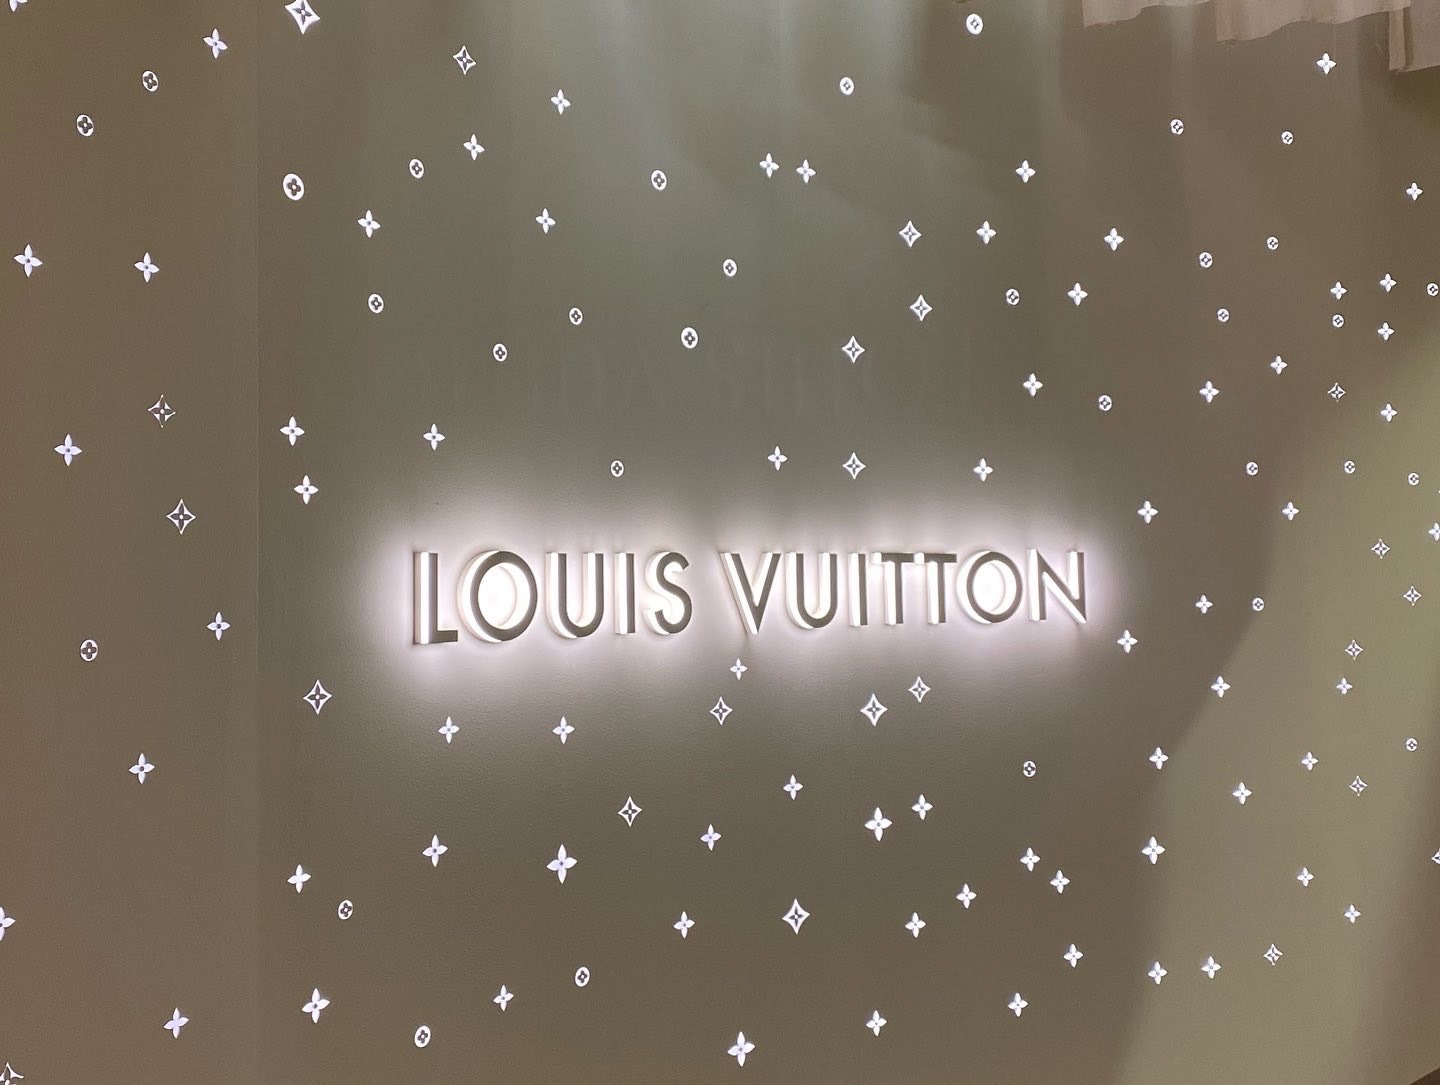 The Louis Vuitton Shop in Dubai Editorial Photo - Image of letters,  editorial: 114077636